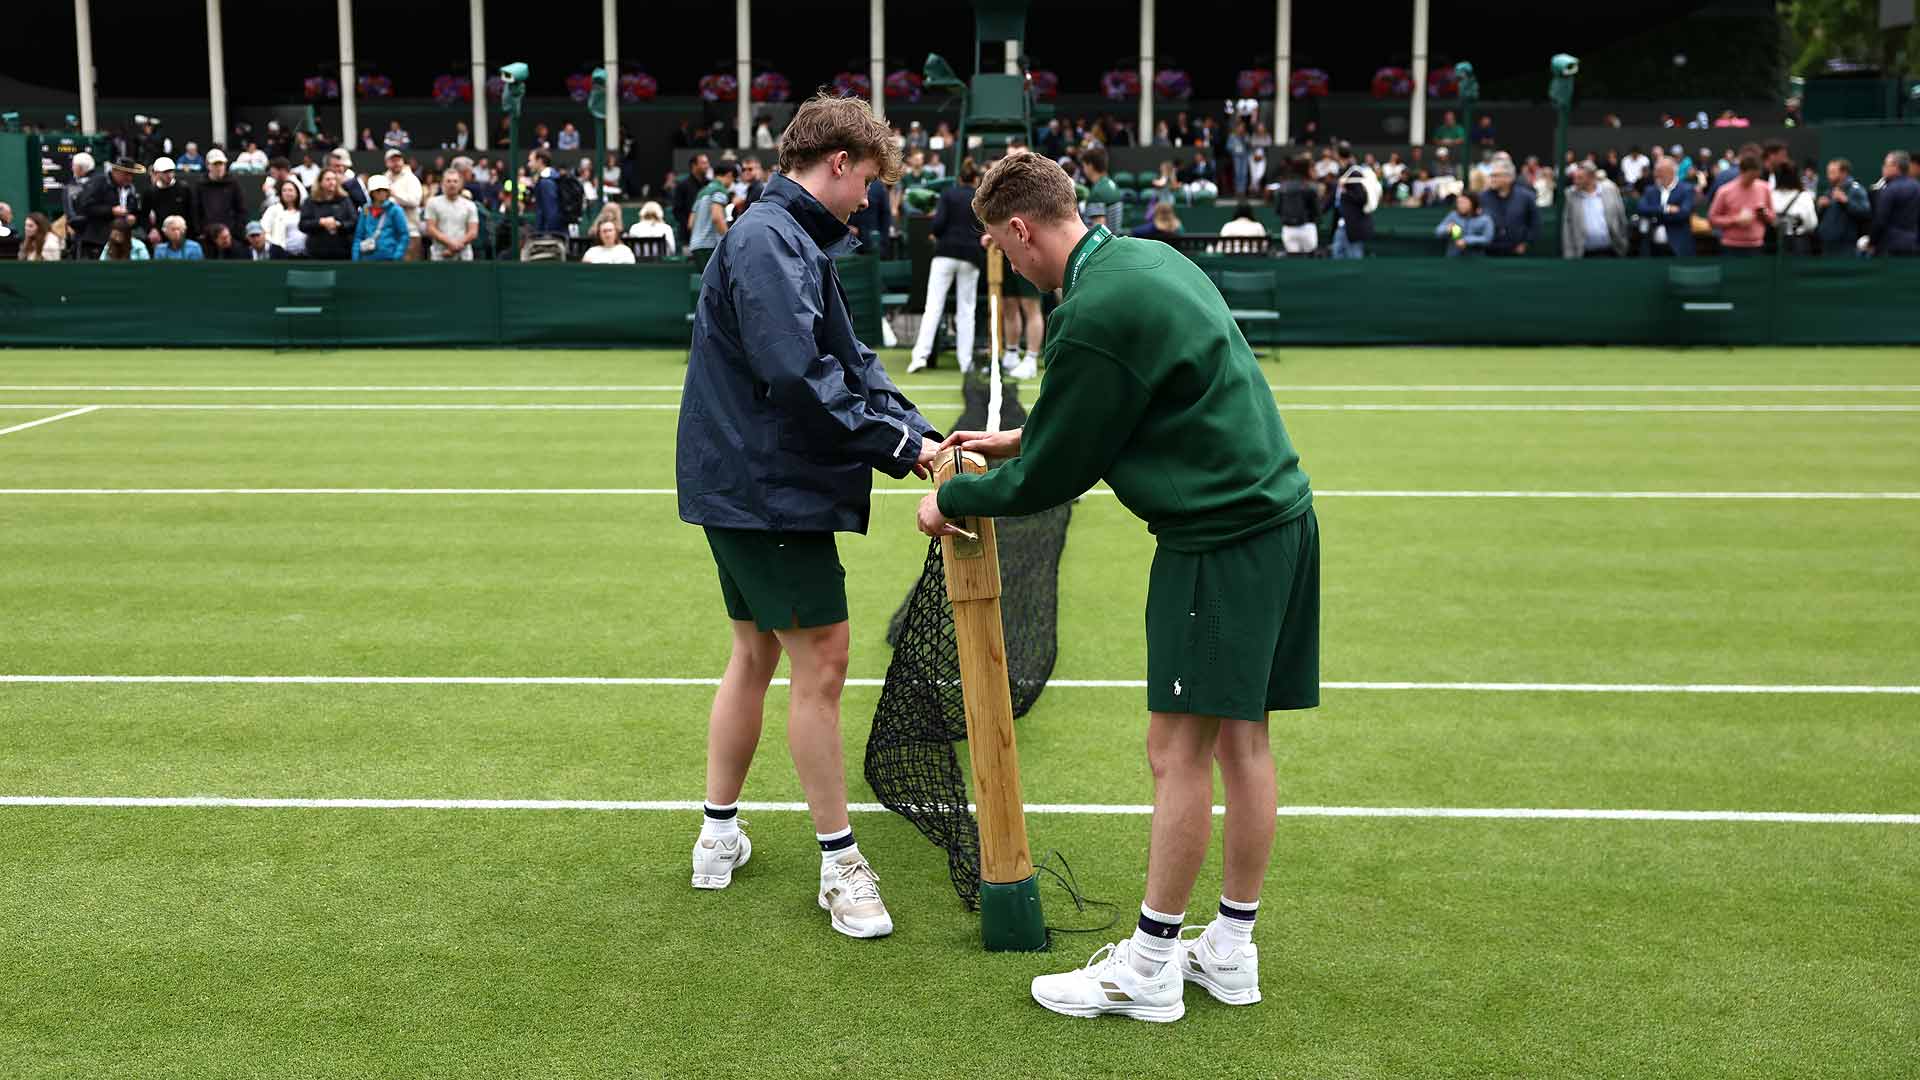 Play resumes on all courts after rain at Wimbledon